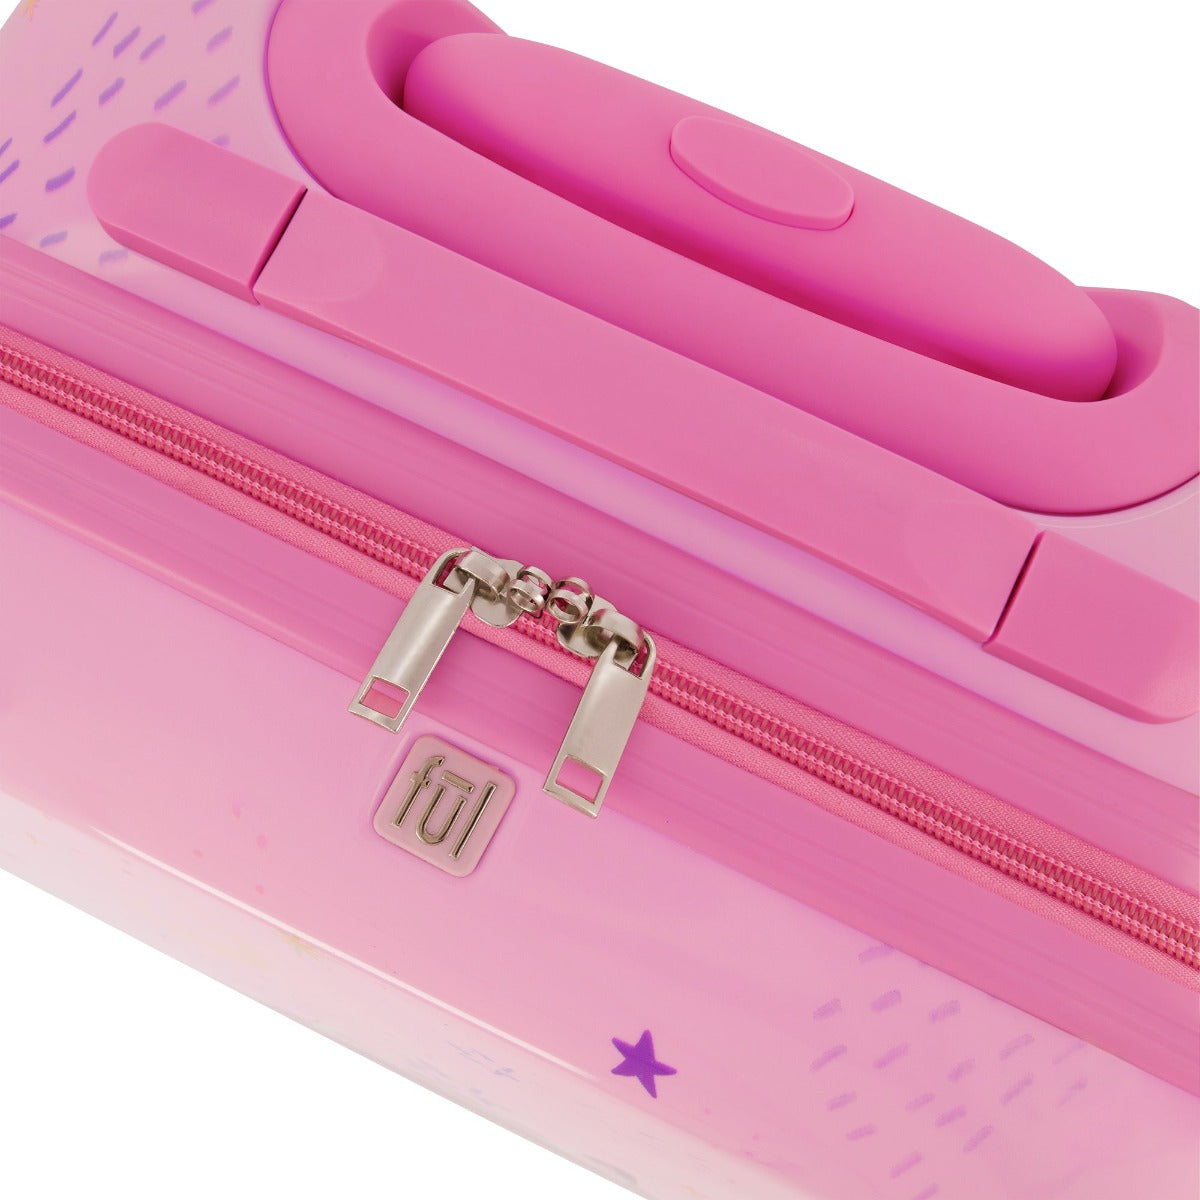 Pink Ful Gabby's Dollhouse sketch your dreams - best kids 21" carry-on luggage for traveling